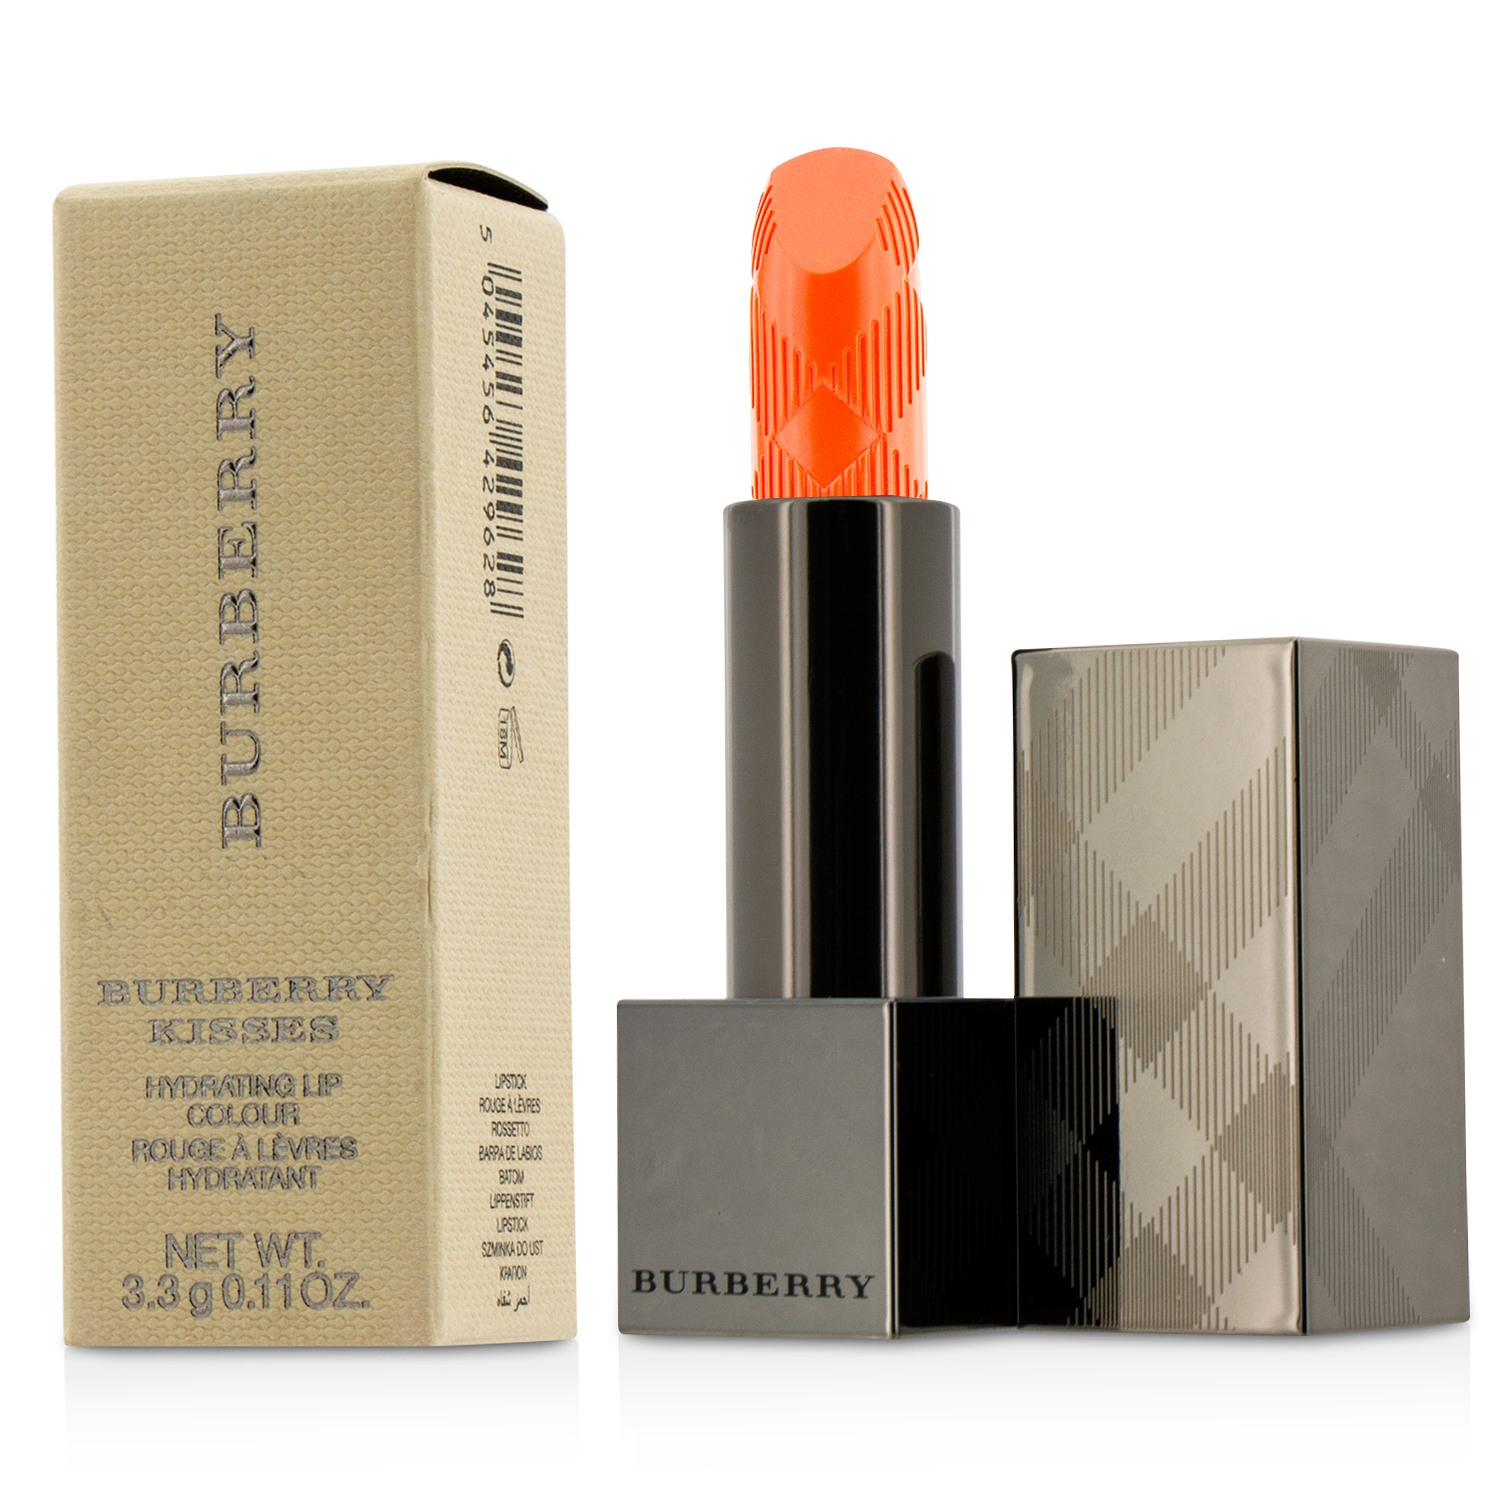 Burberry Kisses Hydrating Lip Colour - # No. 65 Coral Pink Burberry Image